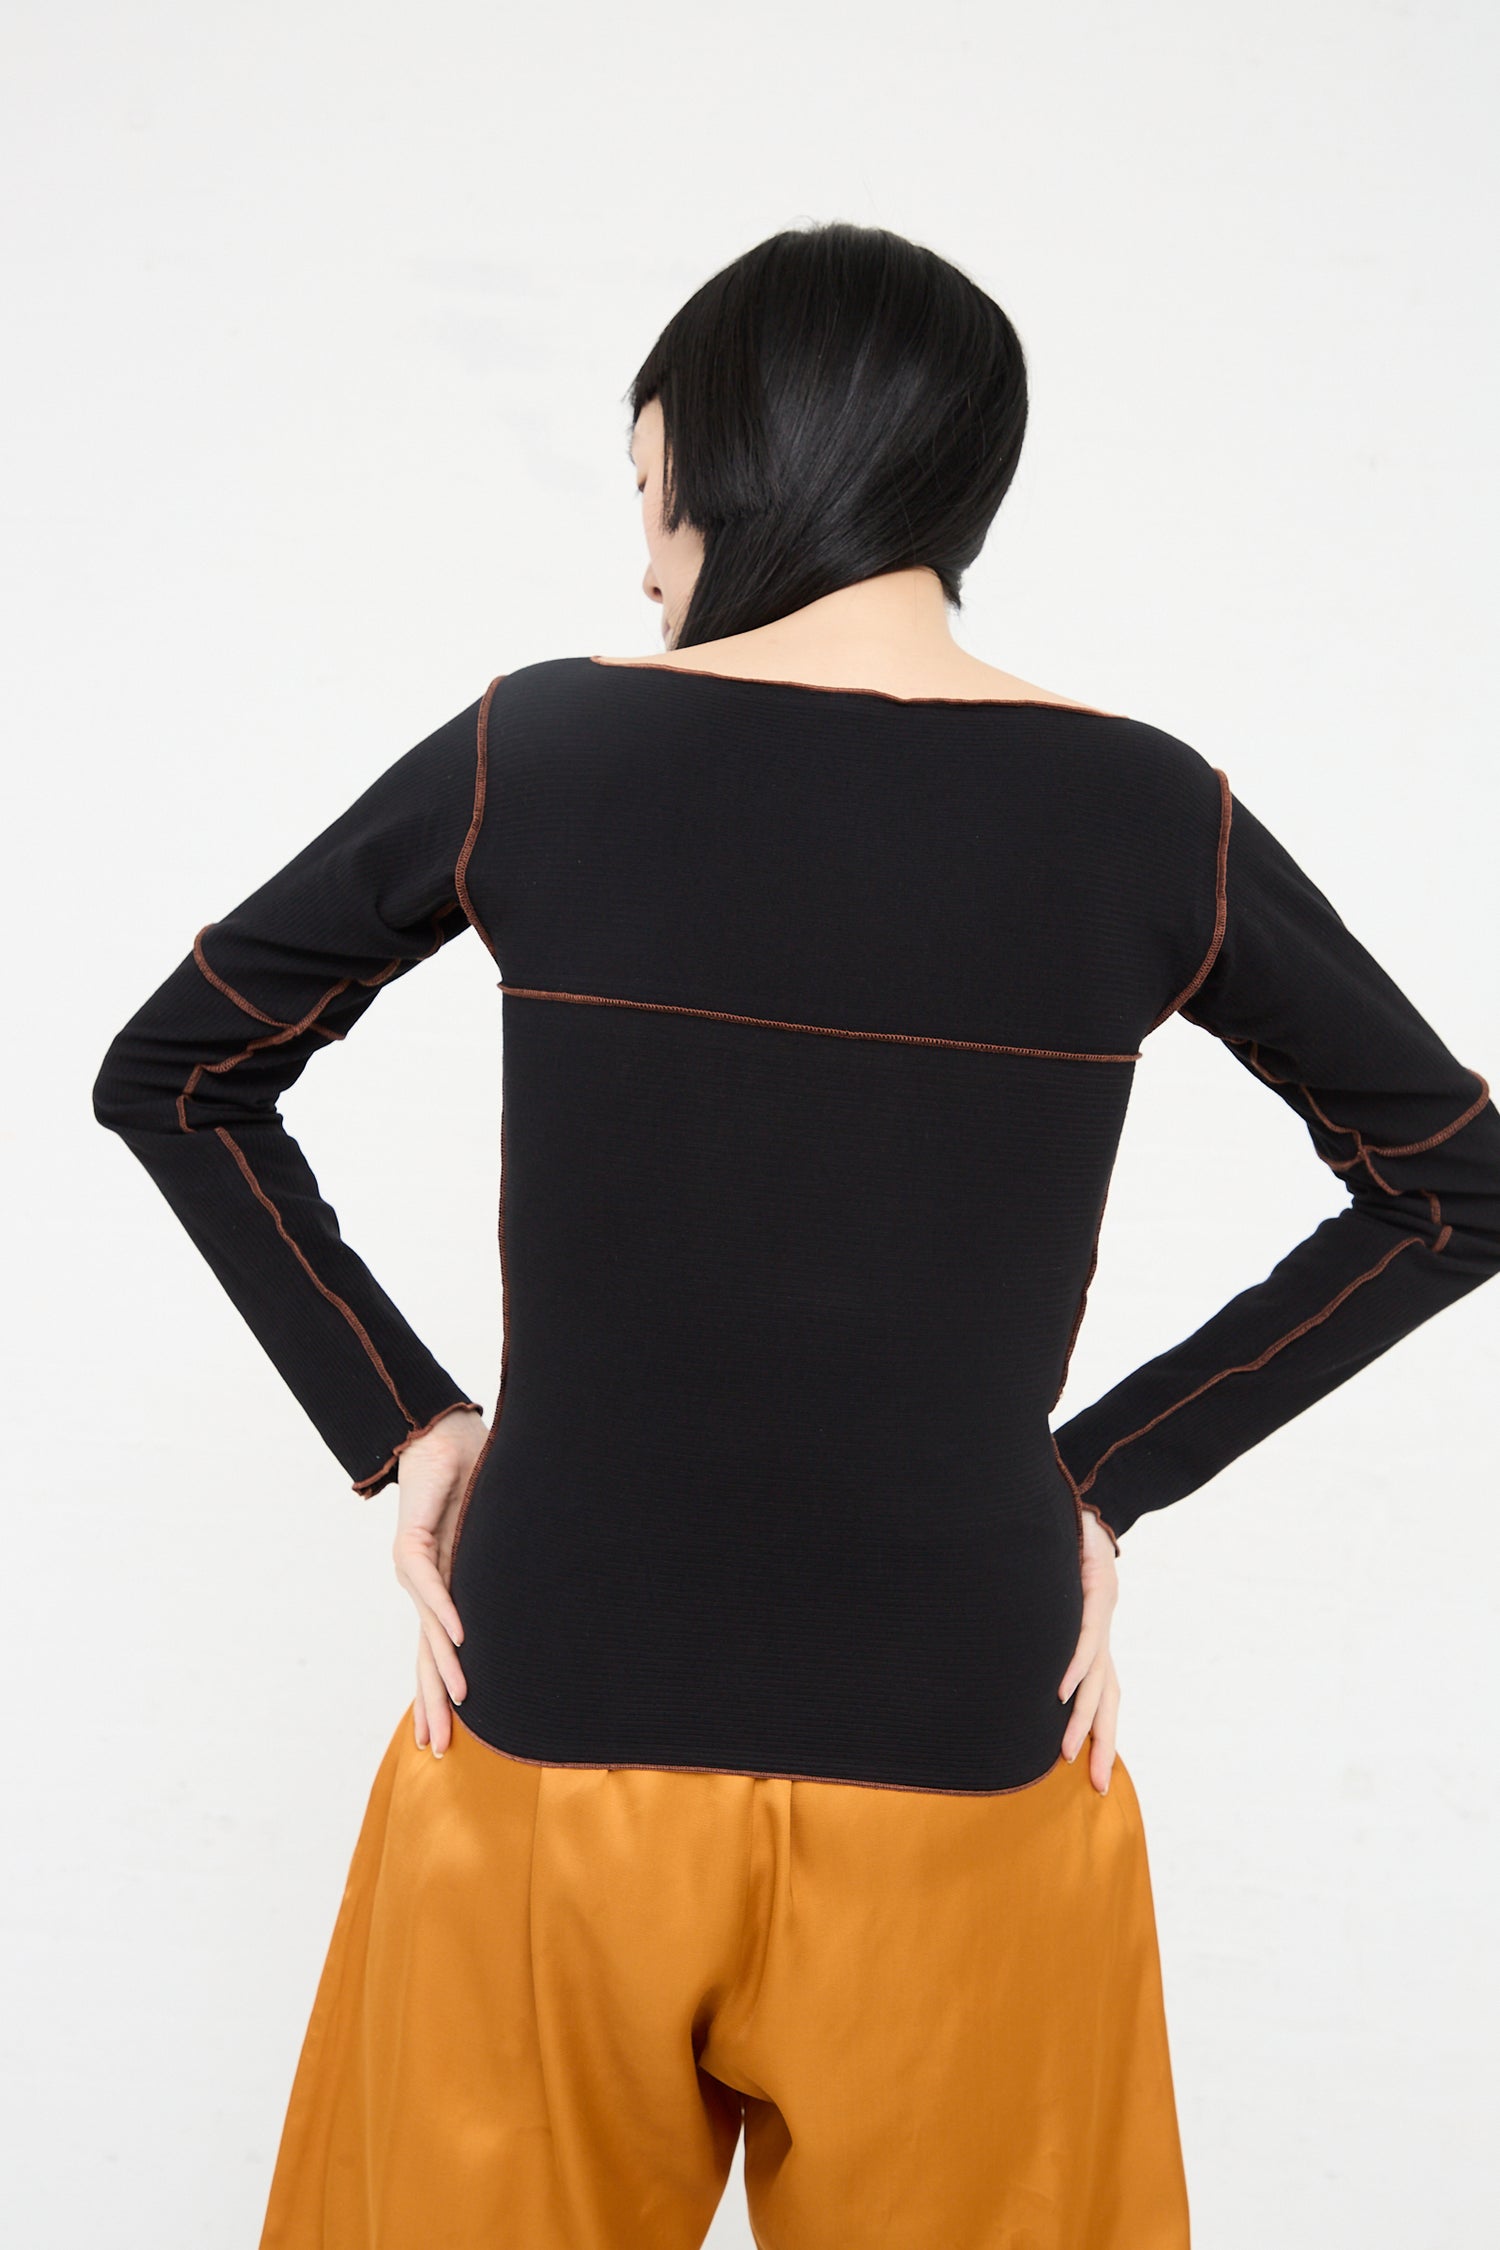 Woman with bob haircut, standing with back to camera, wearing a Baserange Organic Cotton Rib Cinder Long Sleeve in Black with orange stitching and orange pants.